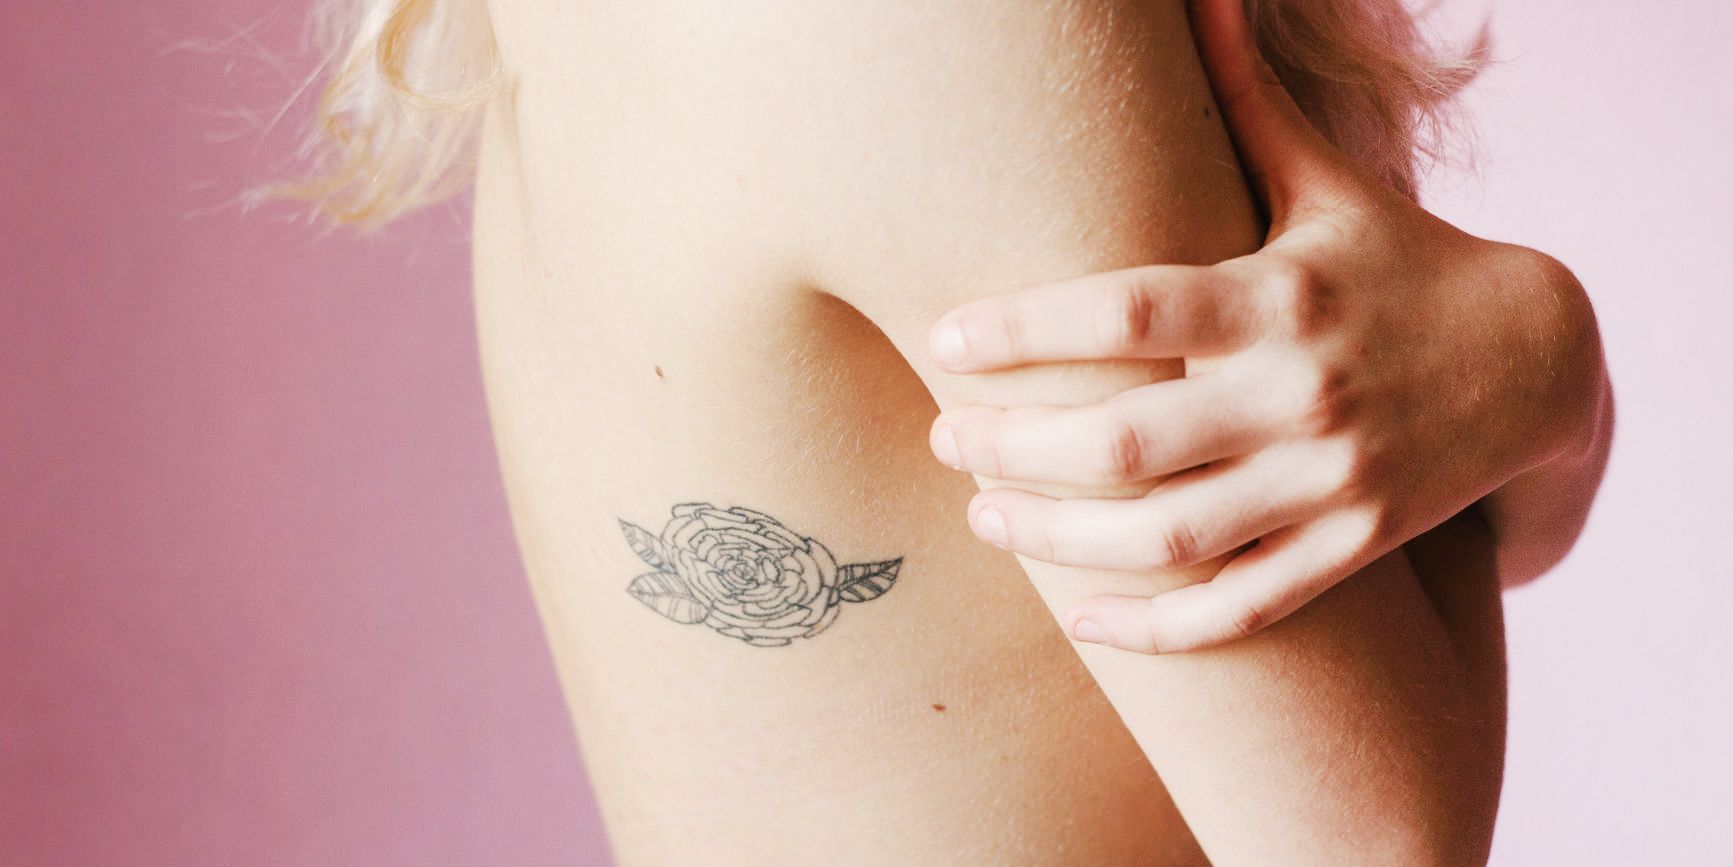 4 Things You Should Know Before Getting Your First Tattoo